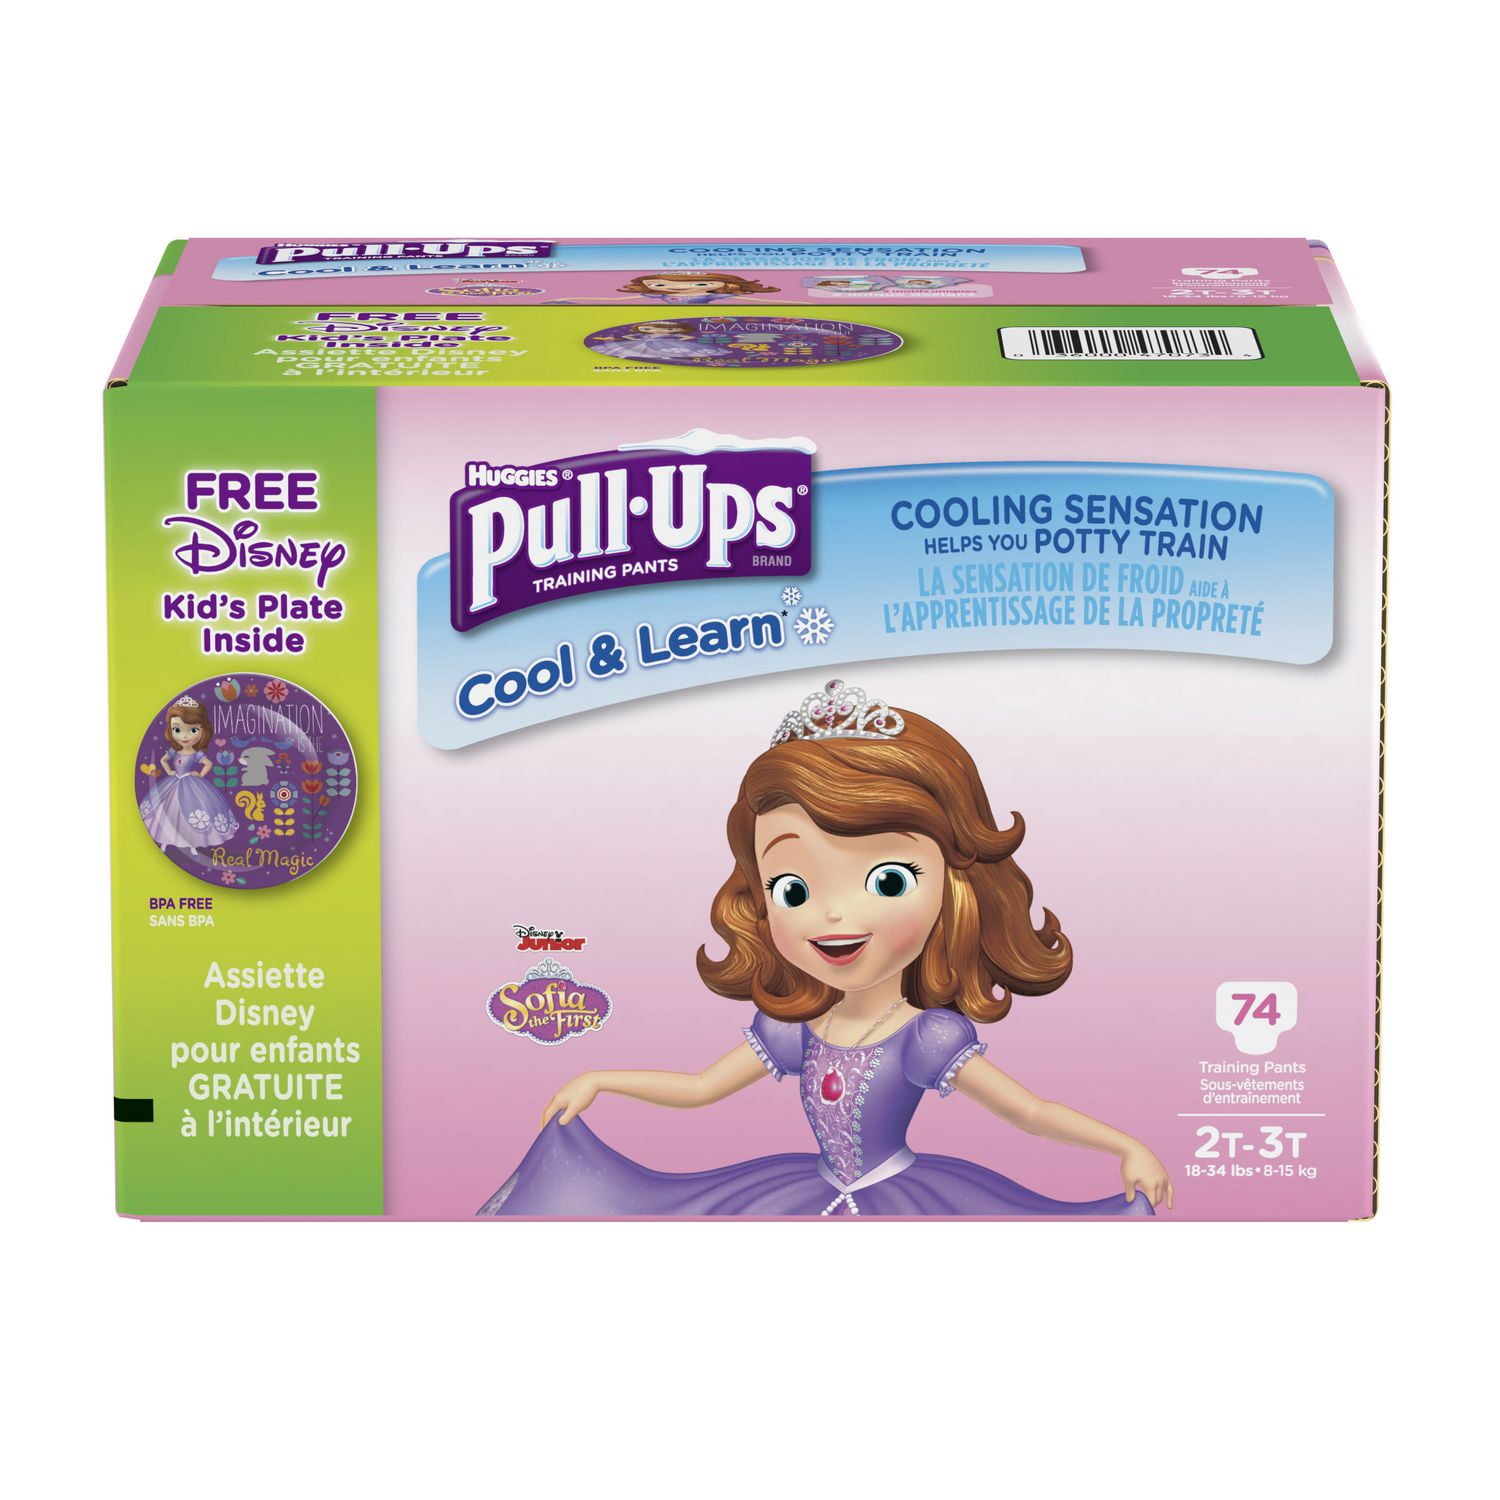 Huggies Pull-Ups Training Pants For Girls Learning Designs 2T-3T